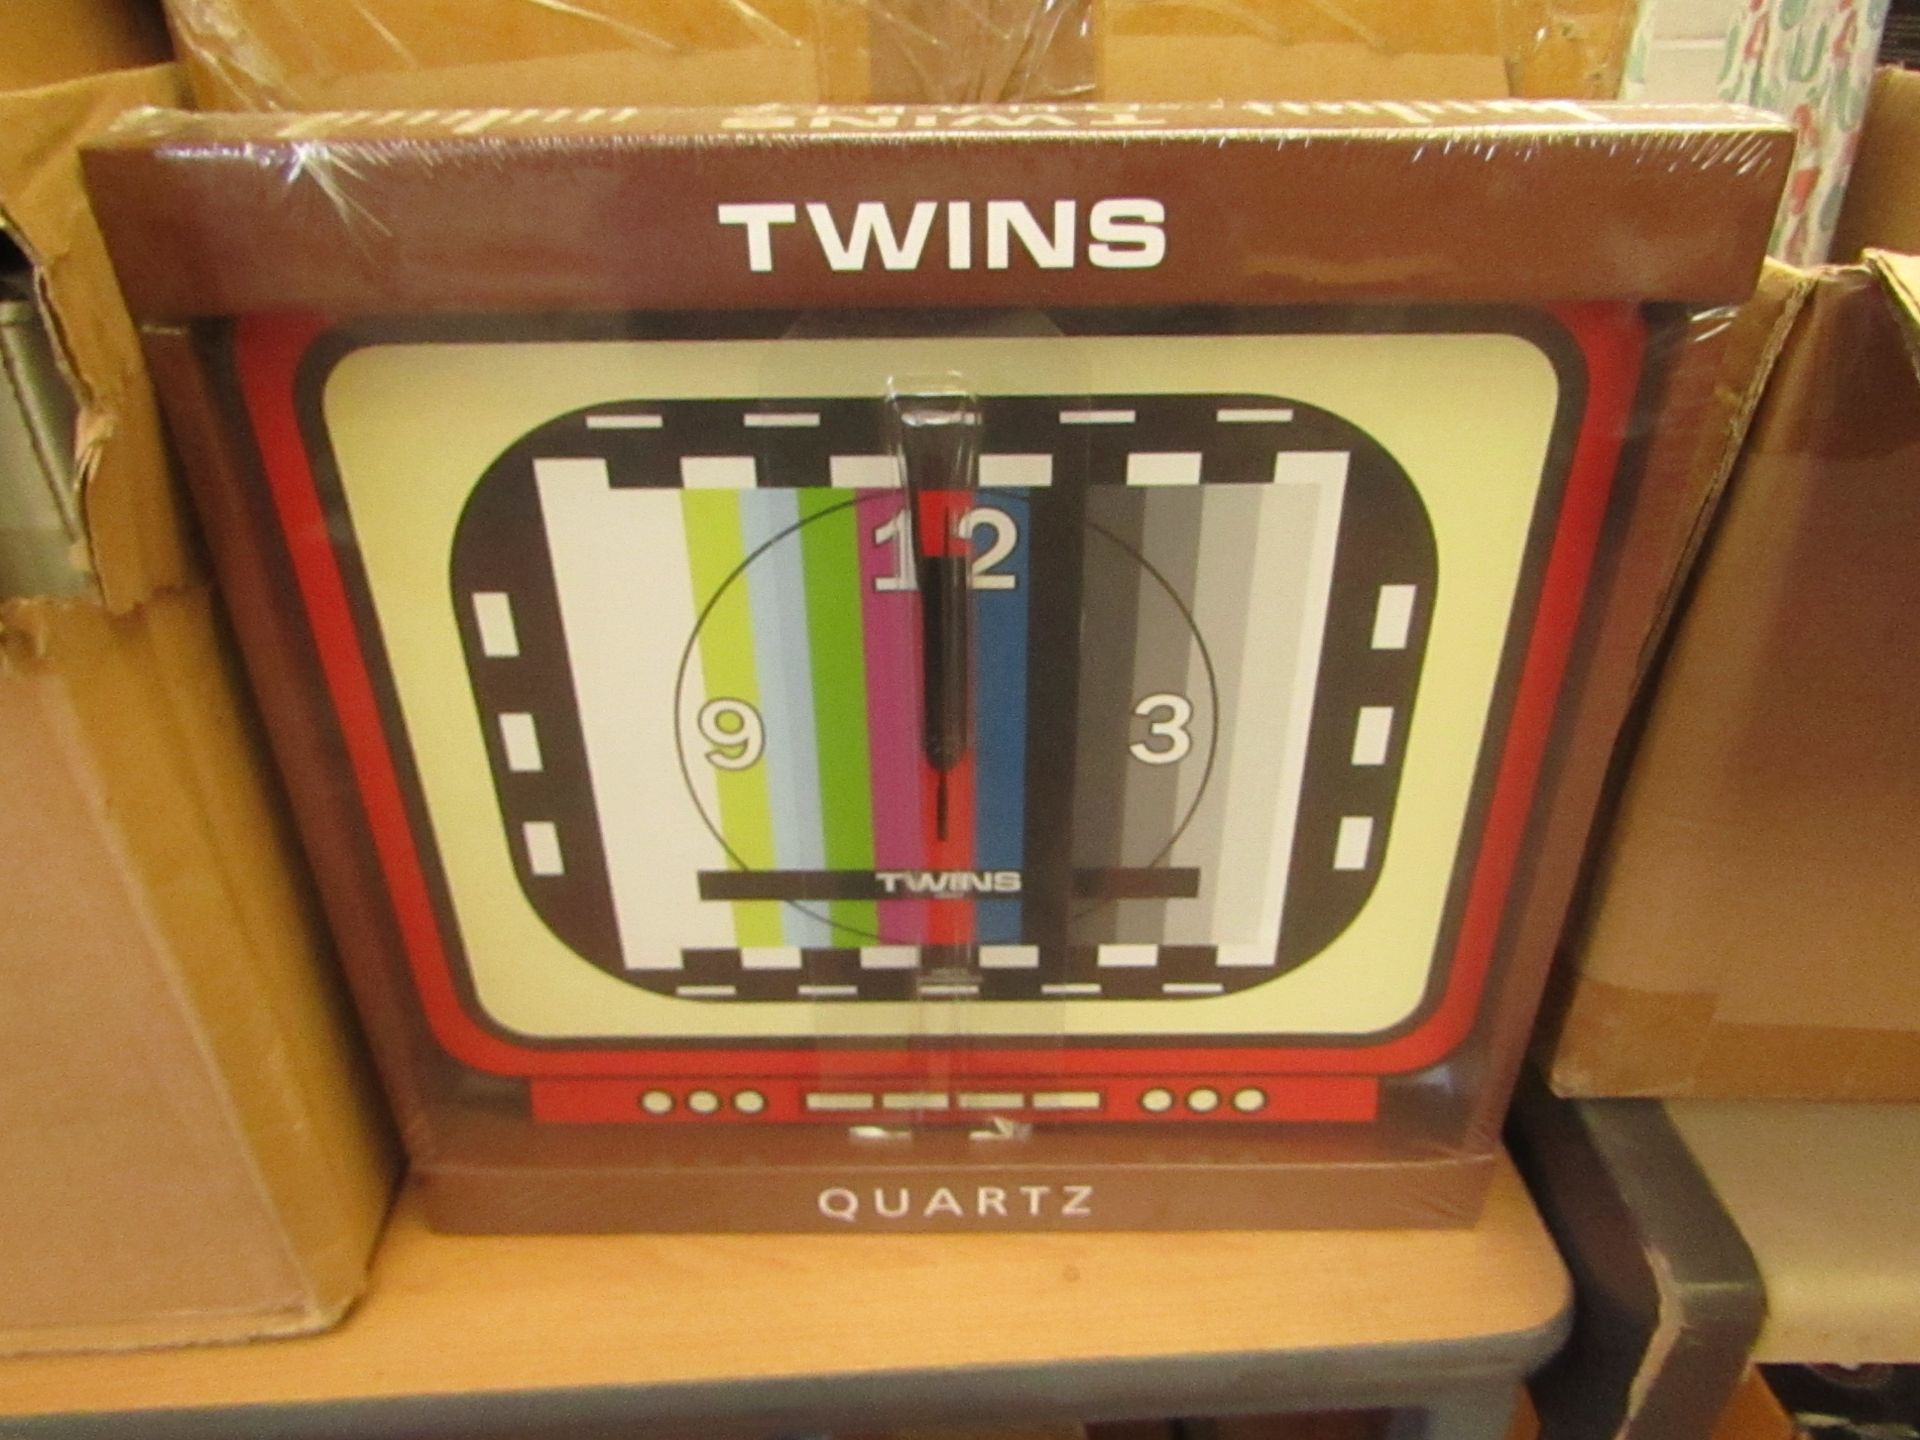 4 x Twins Quartz Wall Clocks new & packaged see image for design